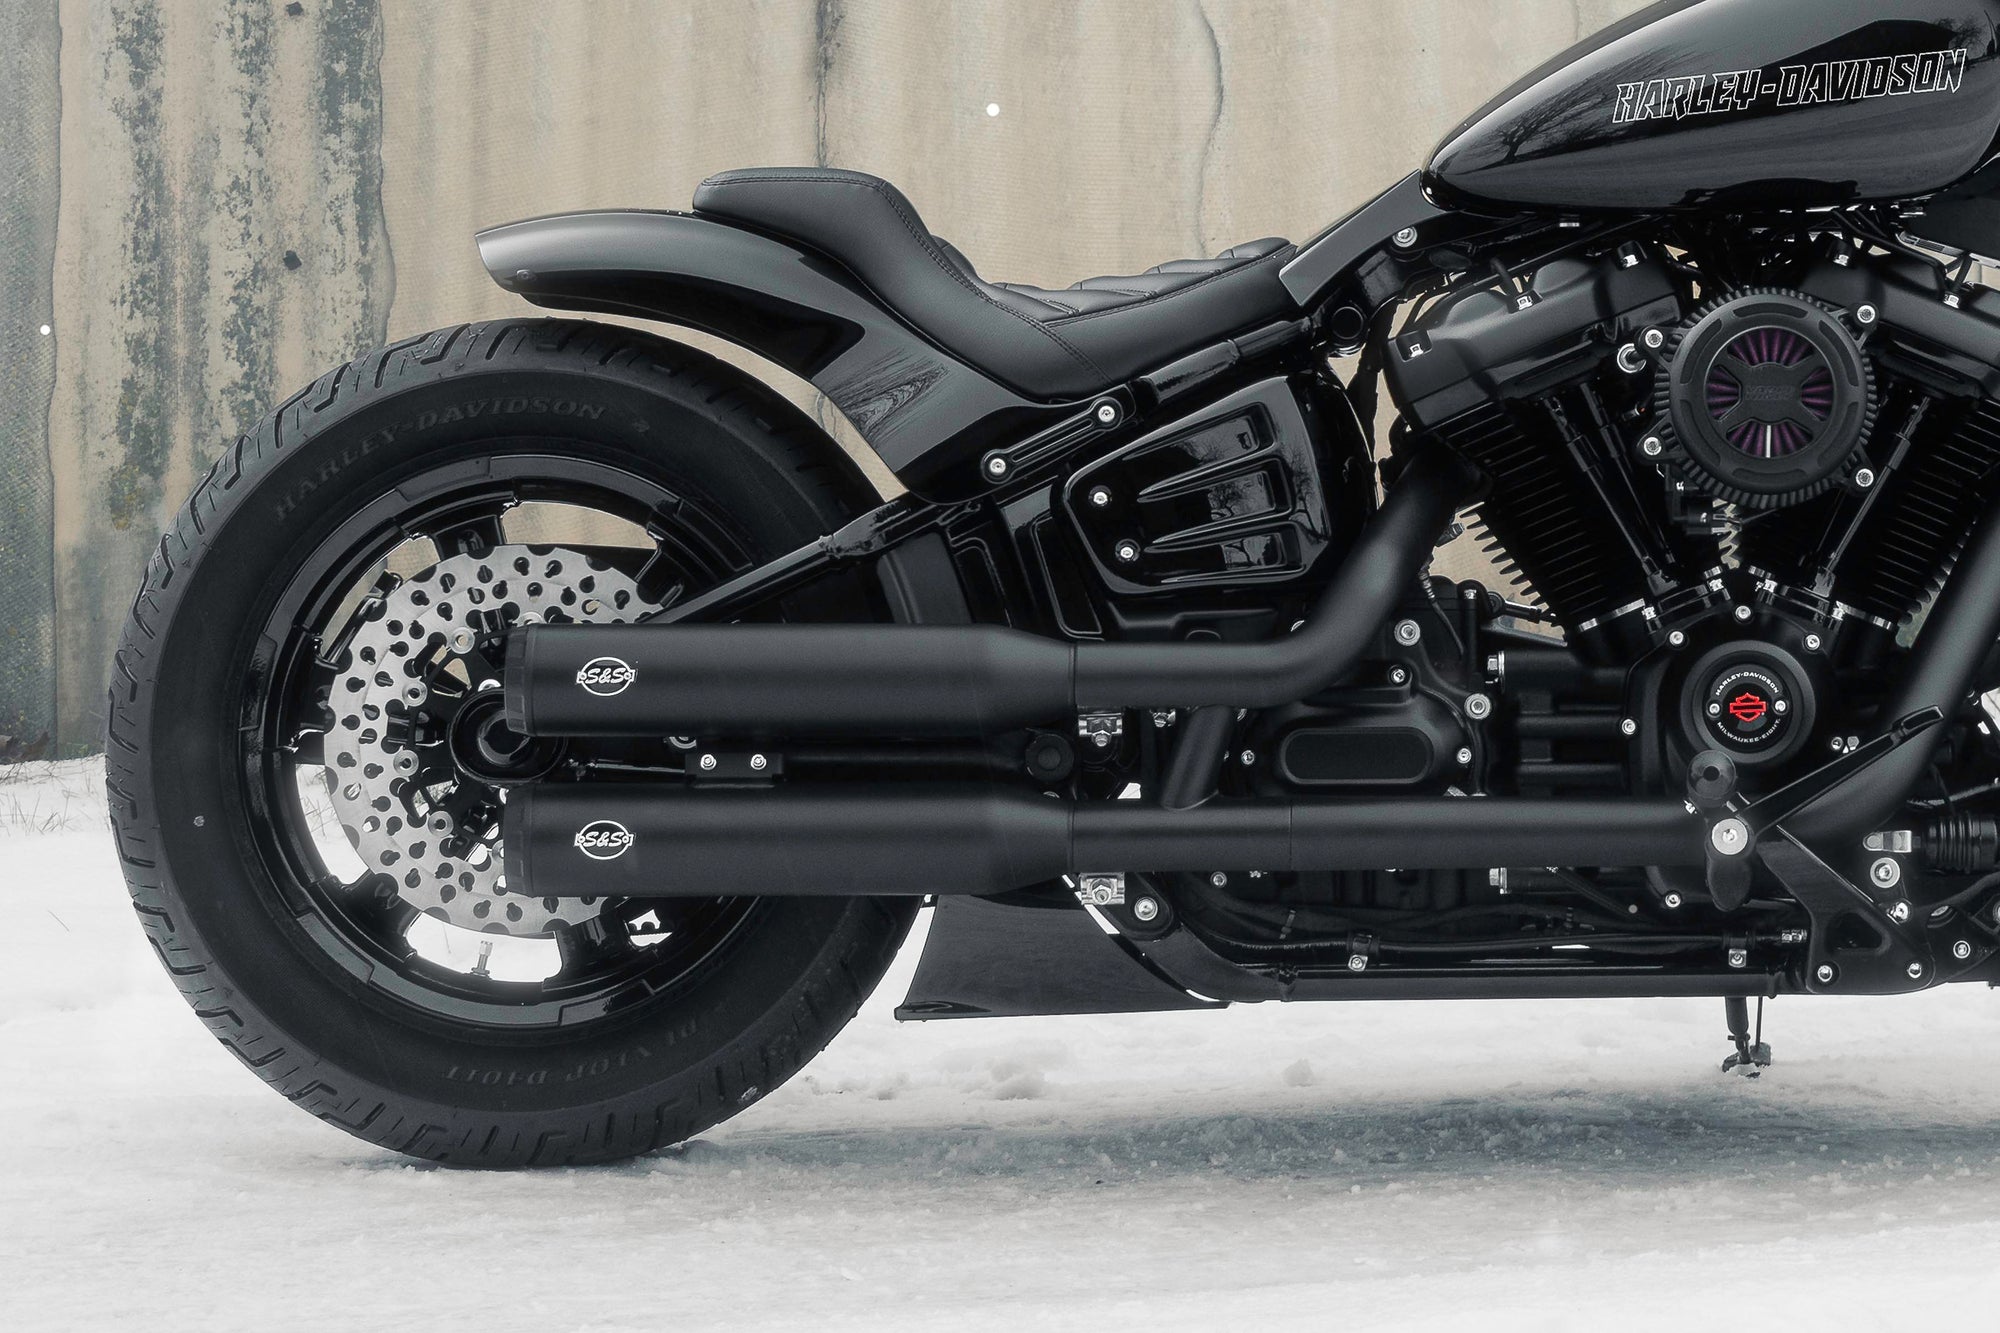 Zoomed Harley Davidson Softail motorcycle with Killer Custom parts from the side with some visible snow on the ground neutral background